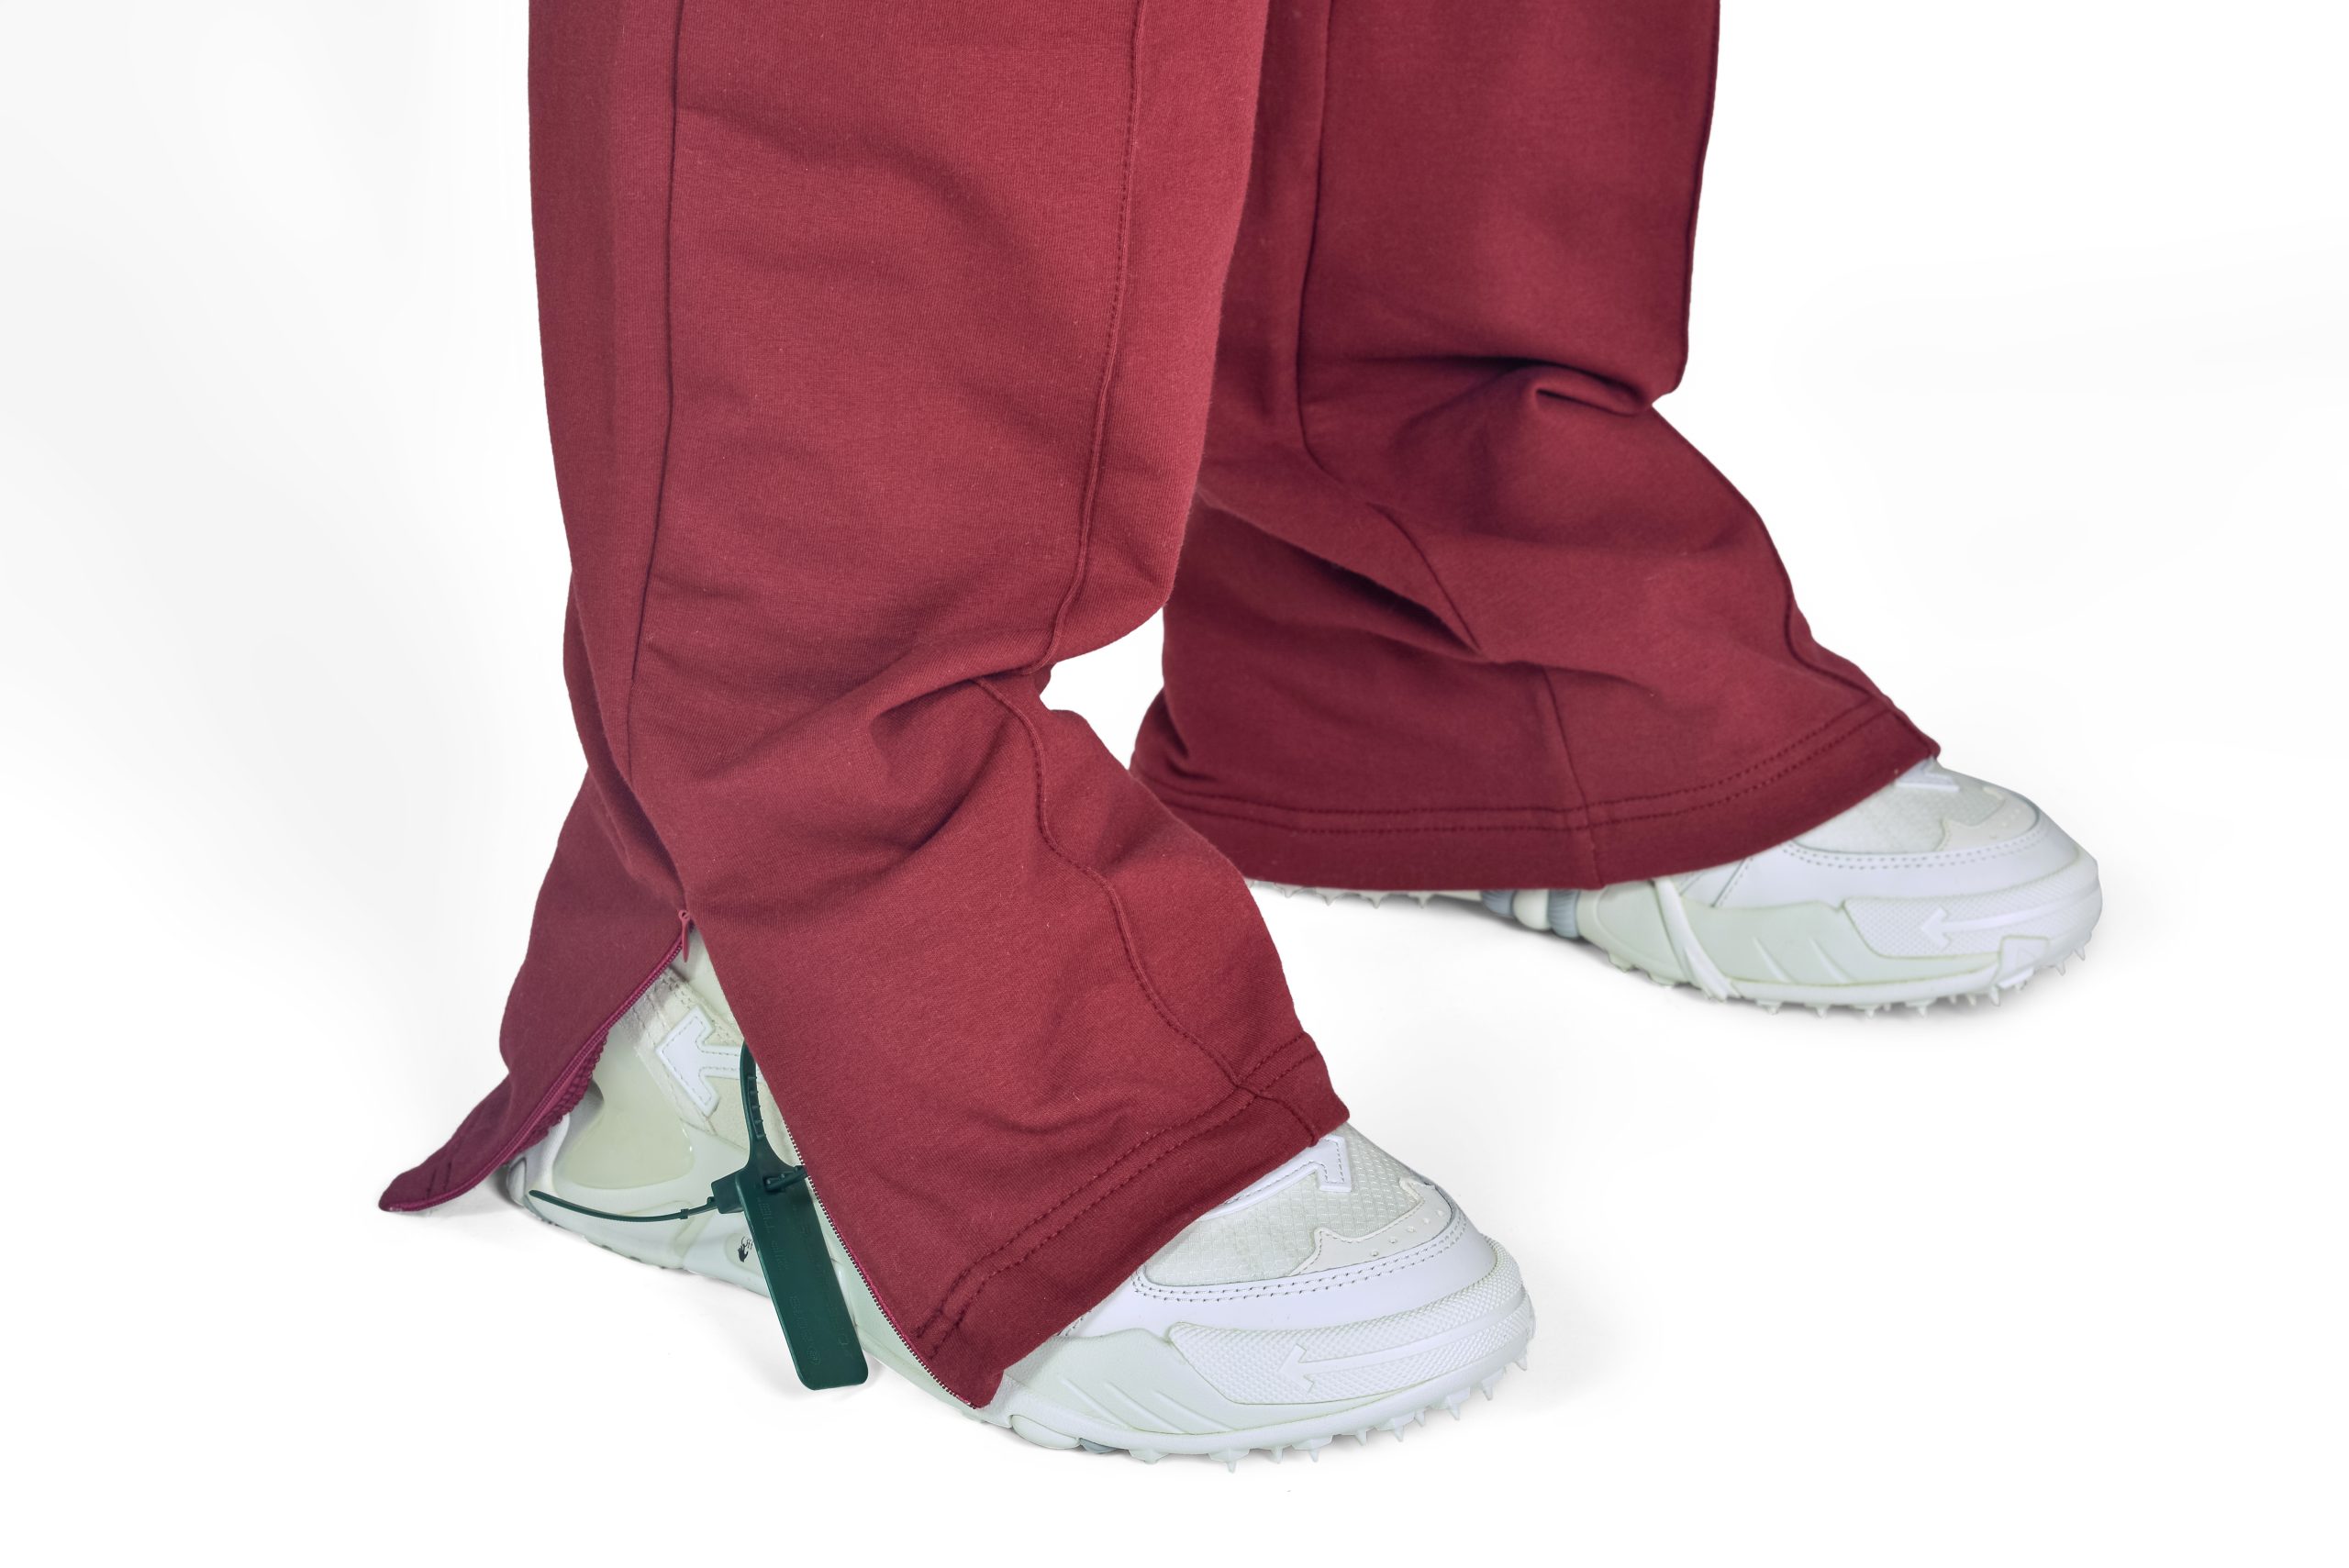 Wide Leg Slit Trousers in Maroon., close up photo of side slit and zipper.